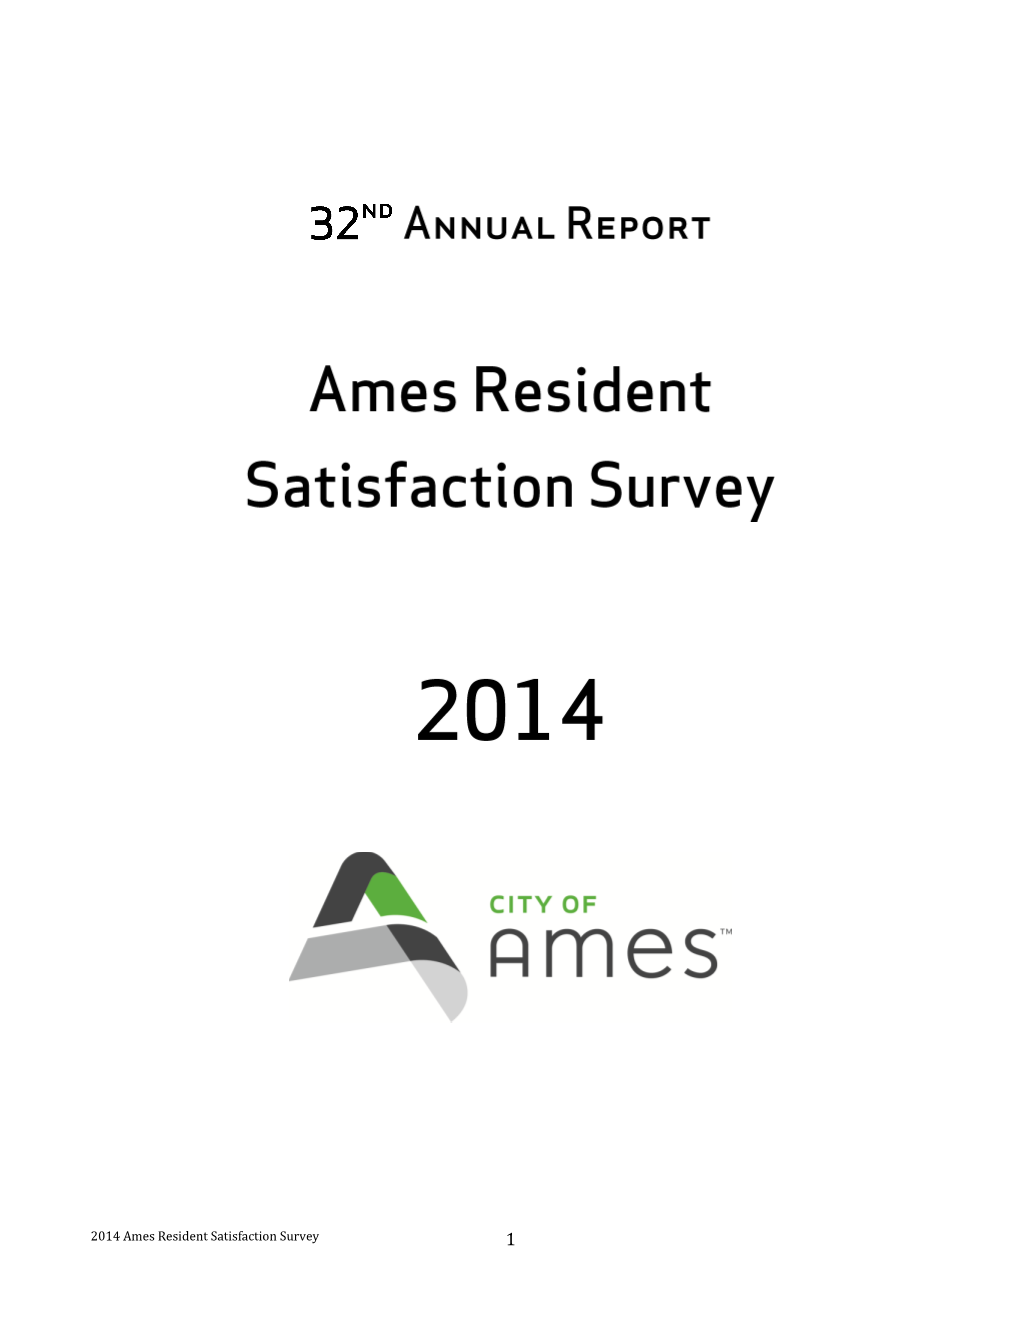 2009 Ames Resident Satisfaction Survey